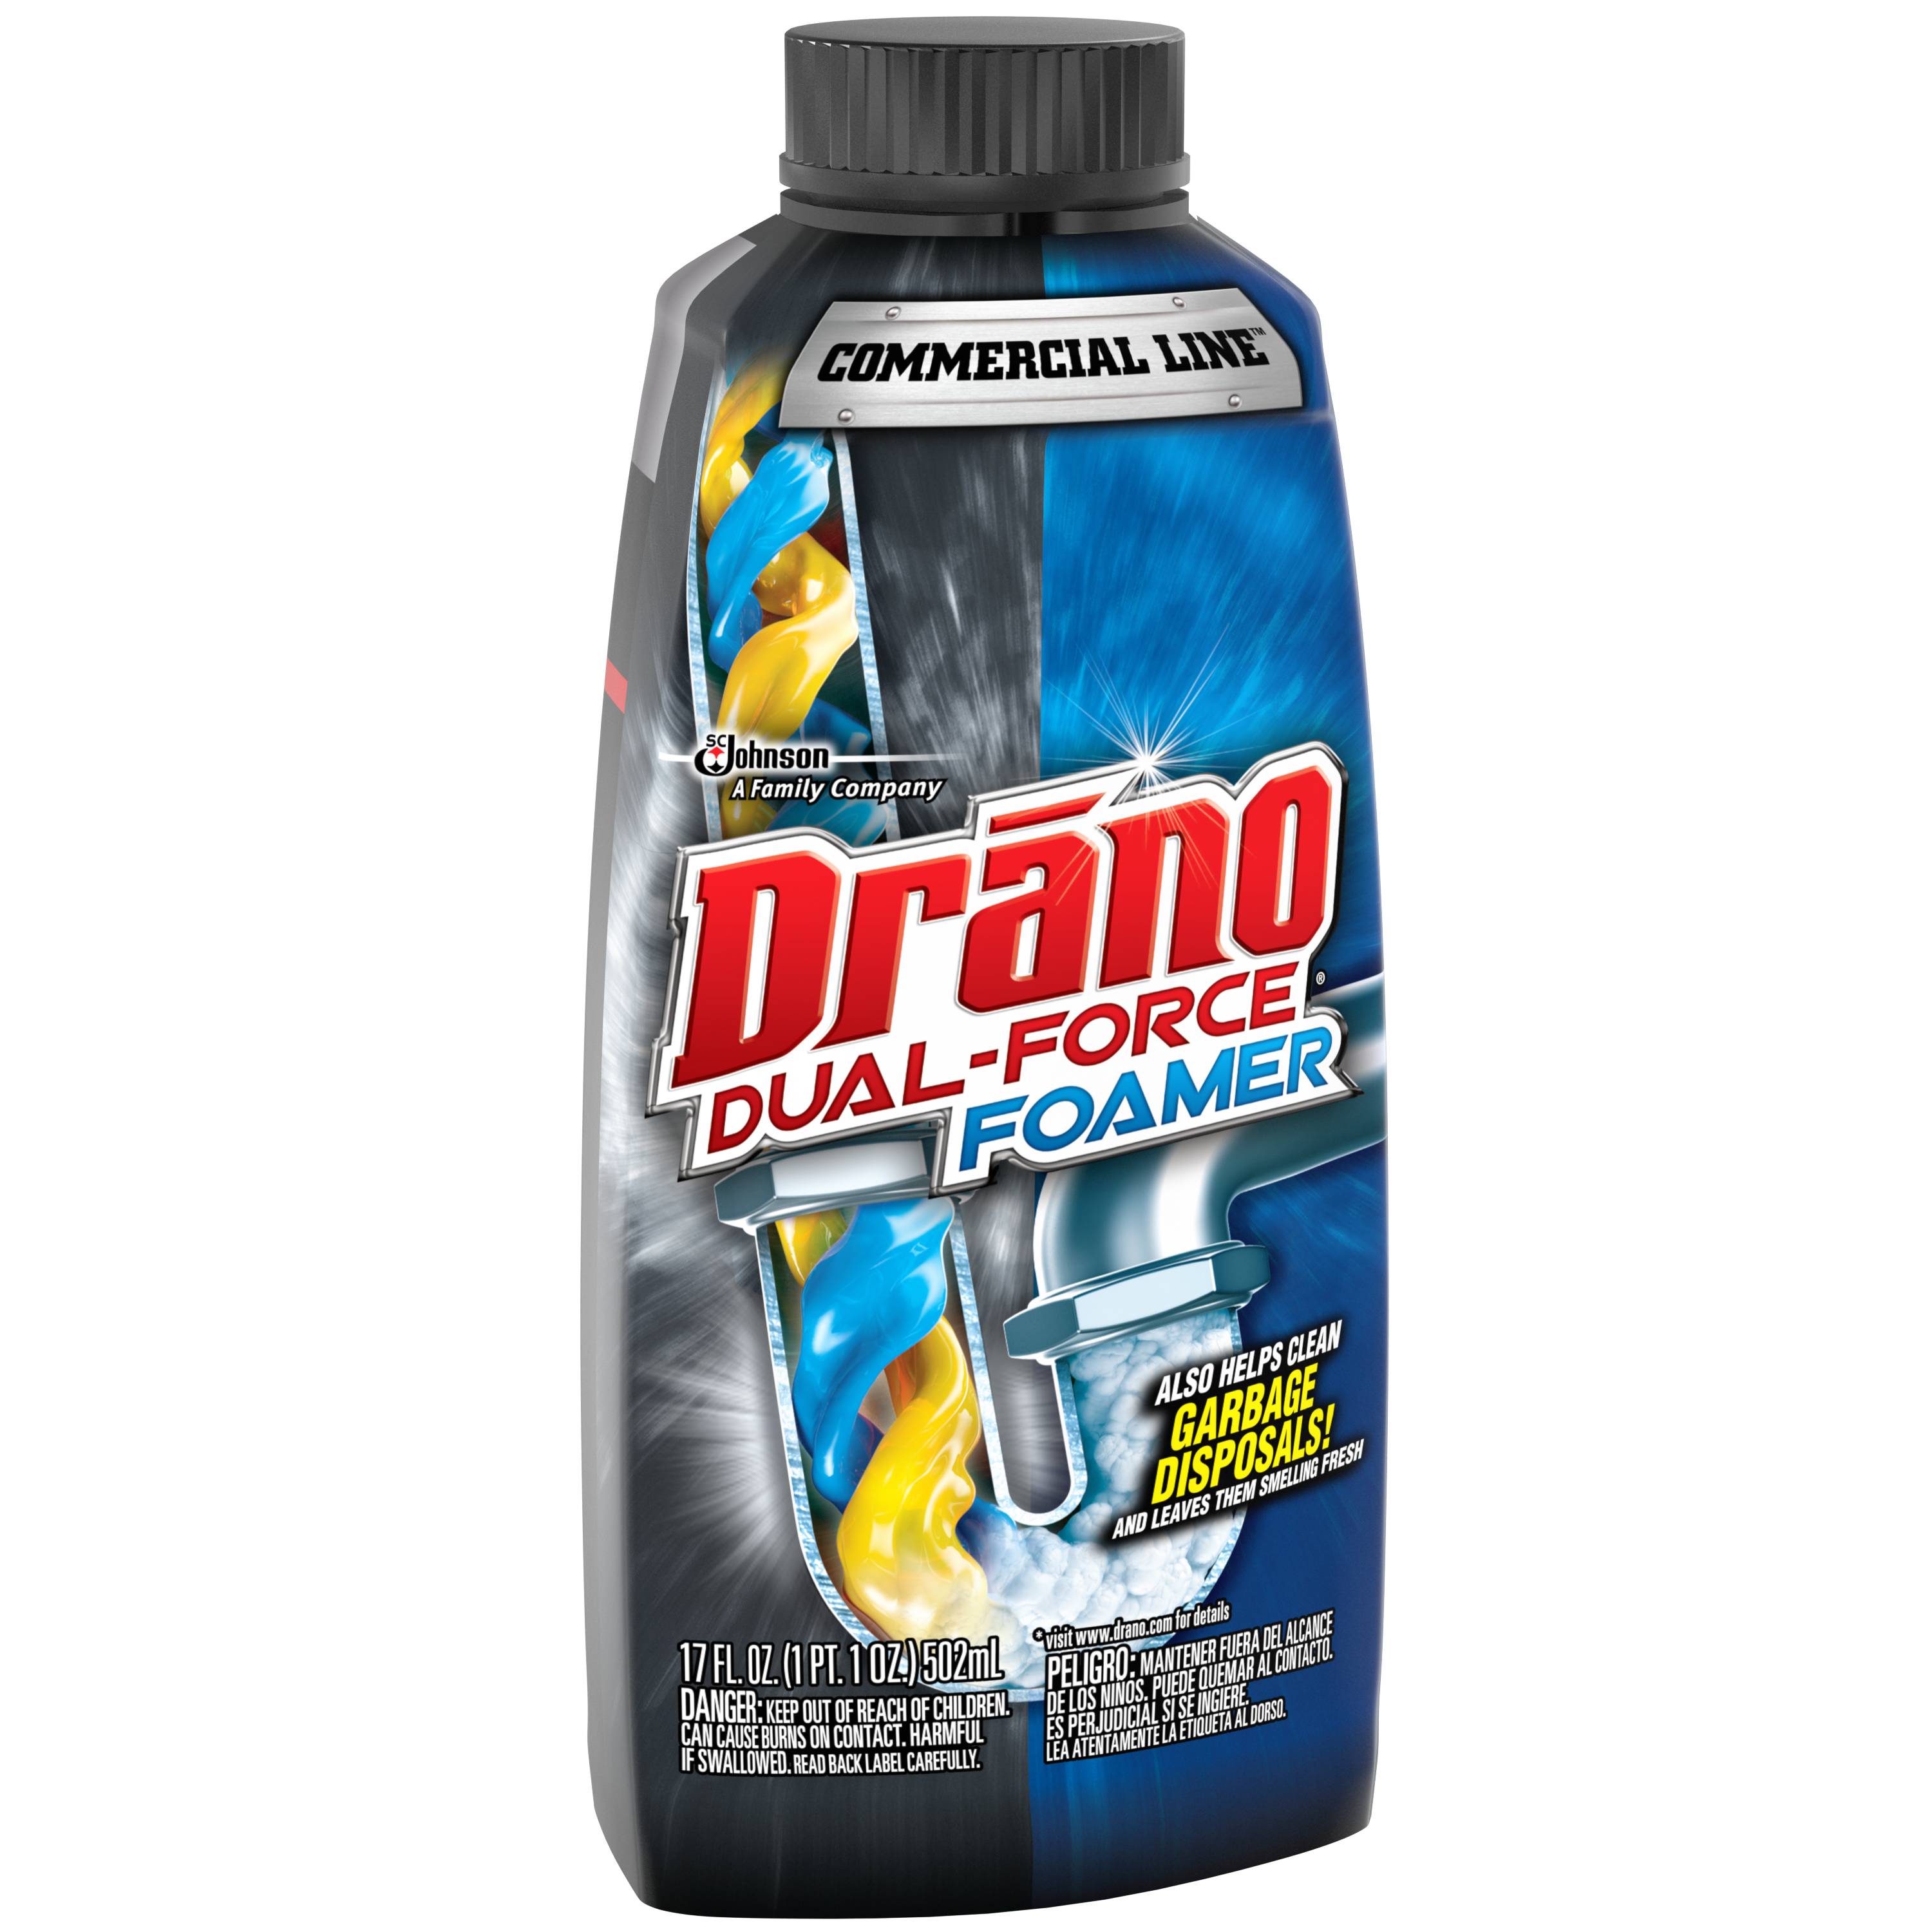 Drano Not Working? How to Remove Clogs When Drano Fails - Prudent Reviews